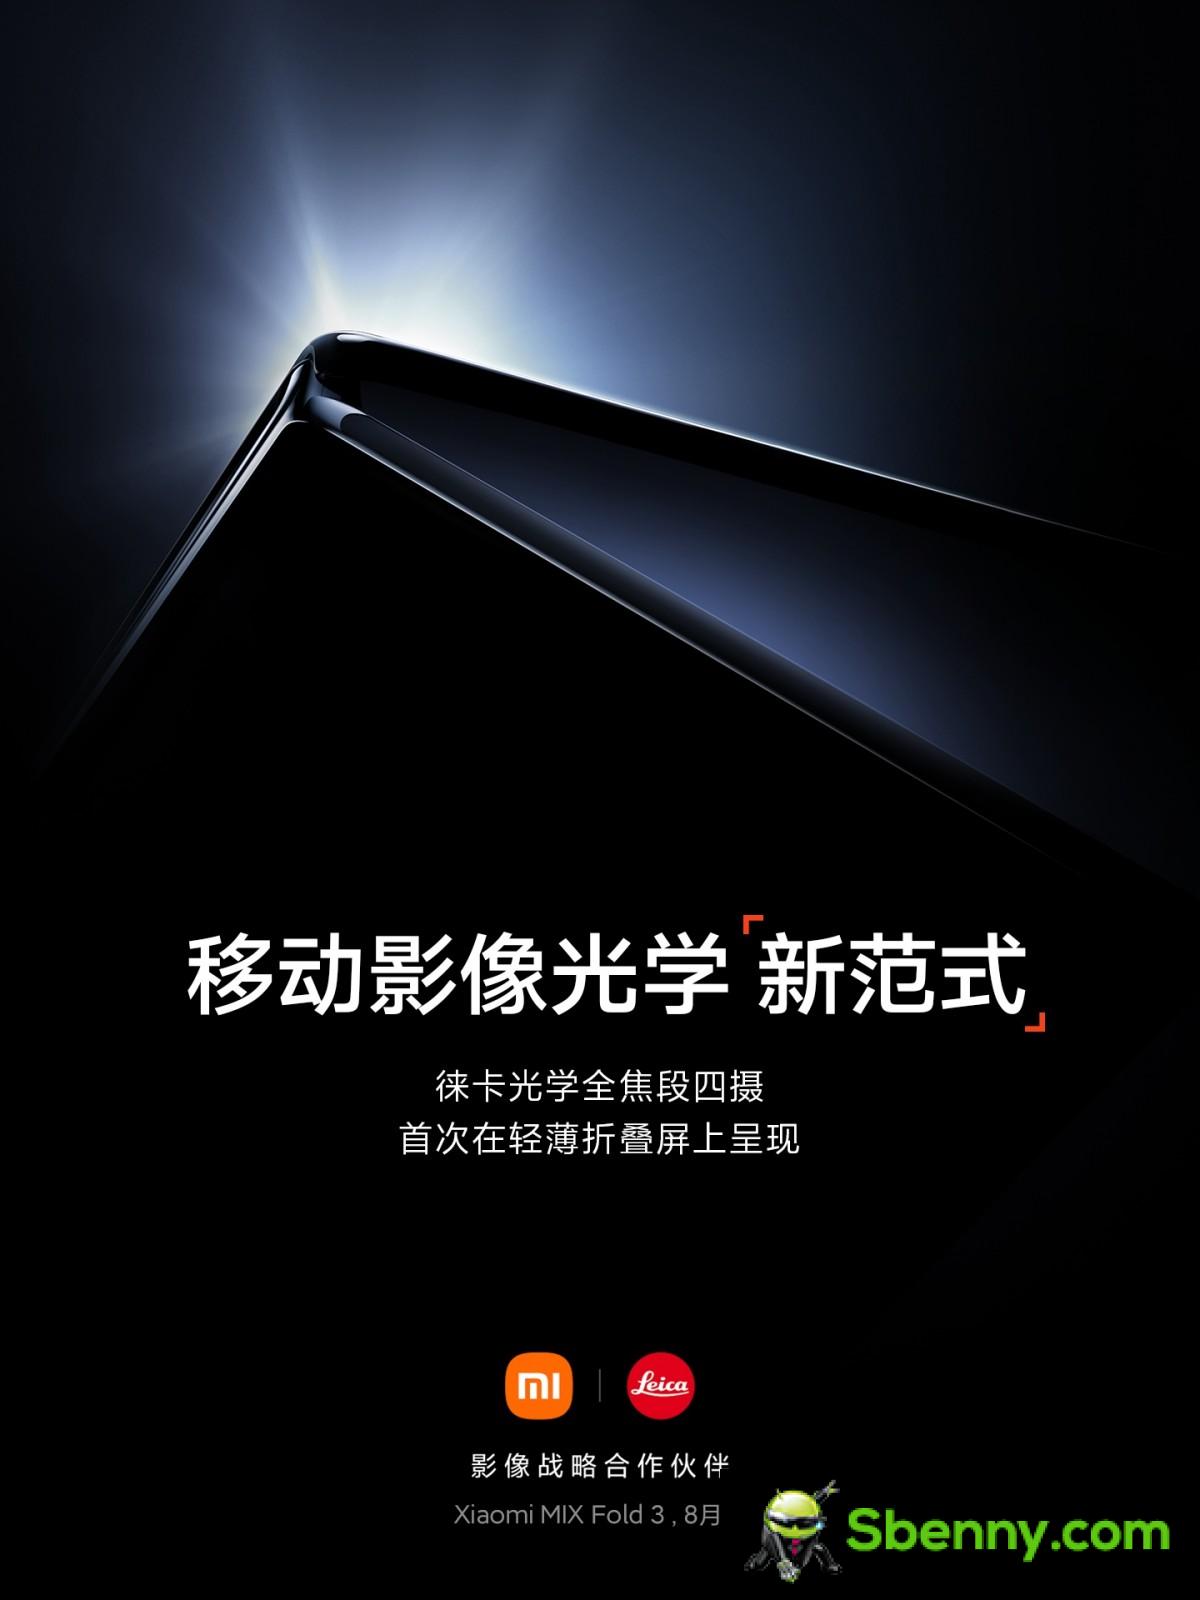 Xiaomi Mix Fold 3 arrival in August will bring four Leica-branded cameras